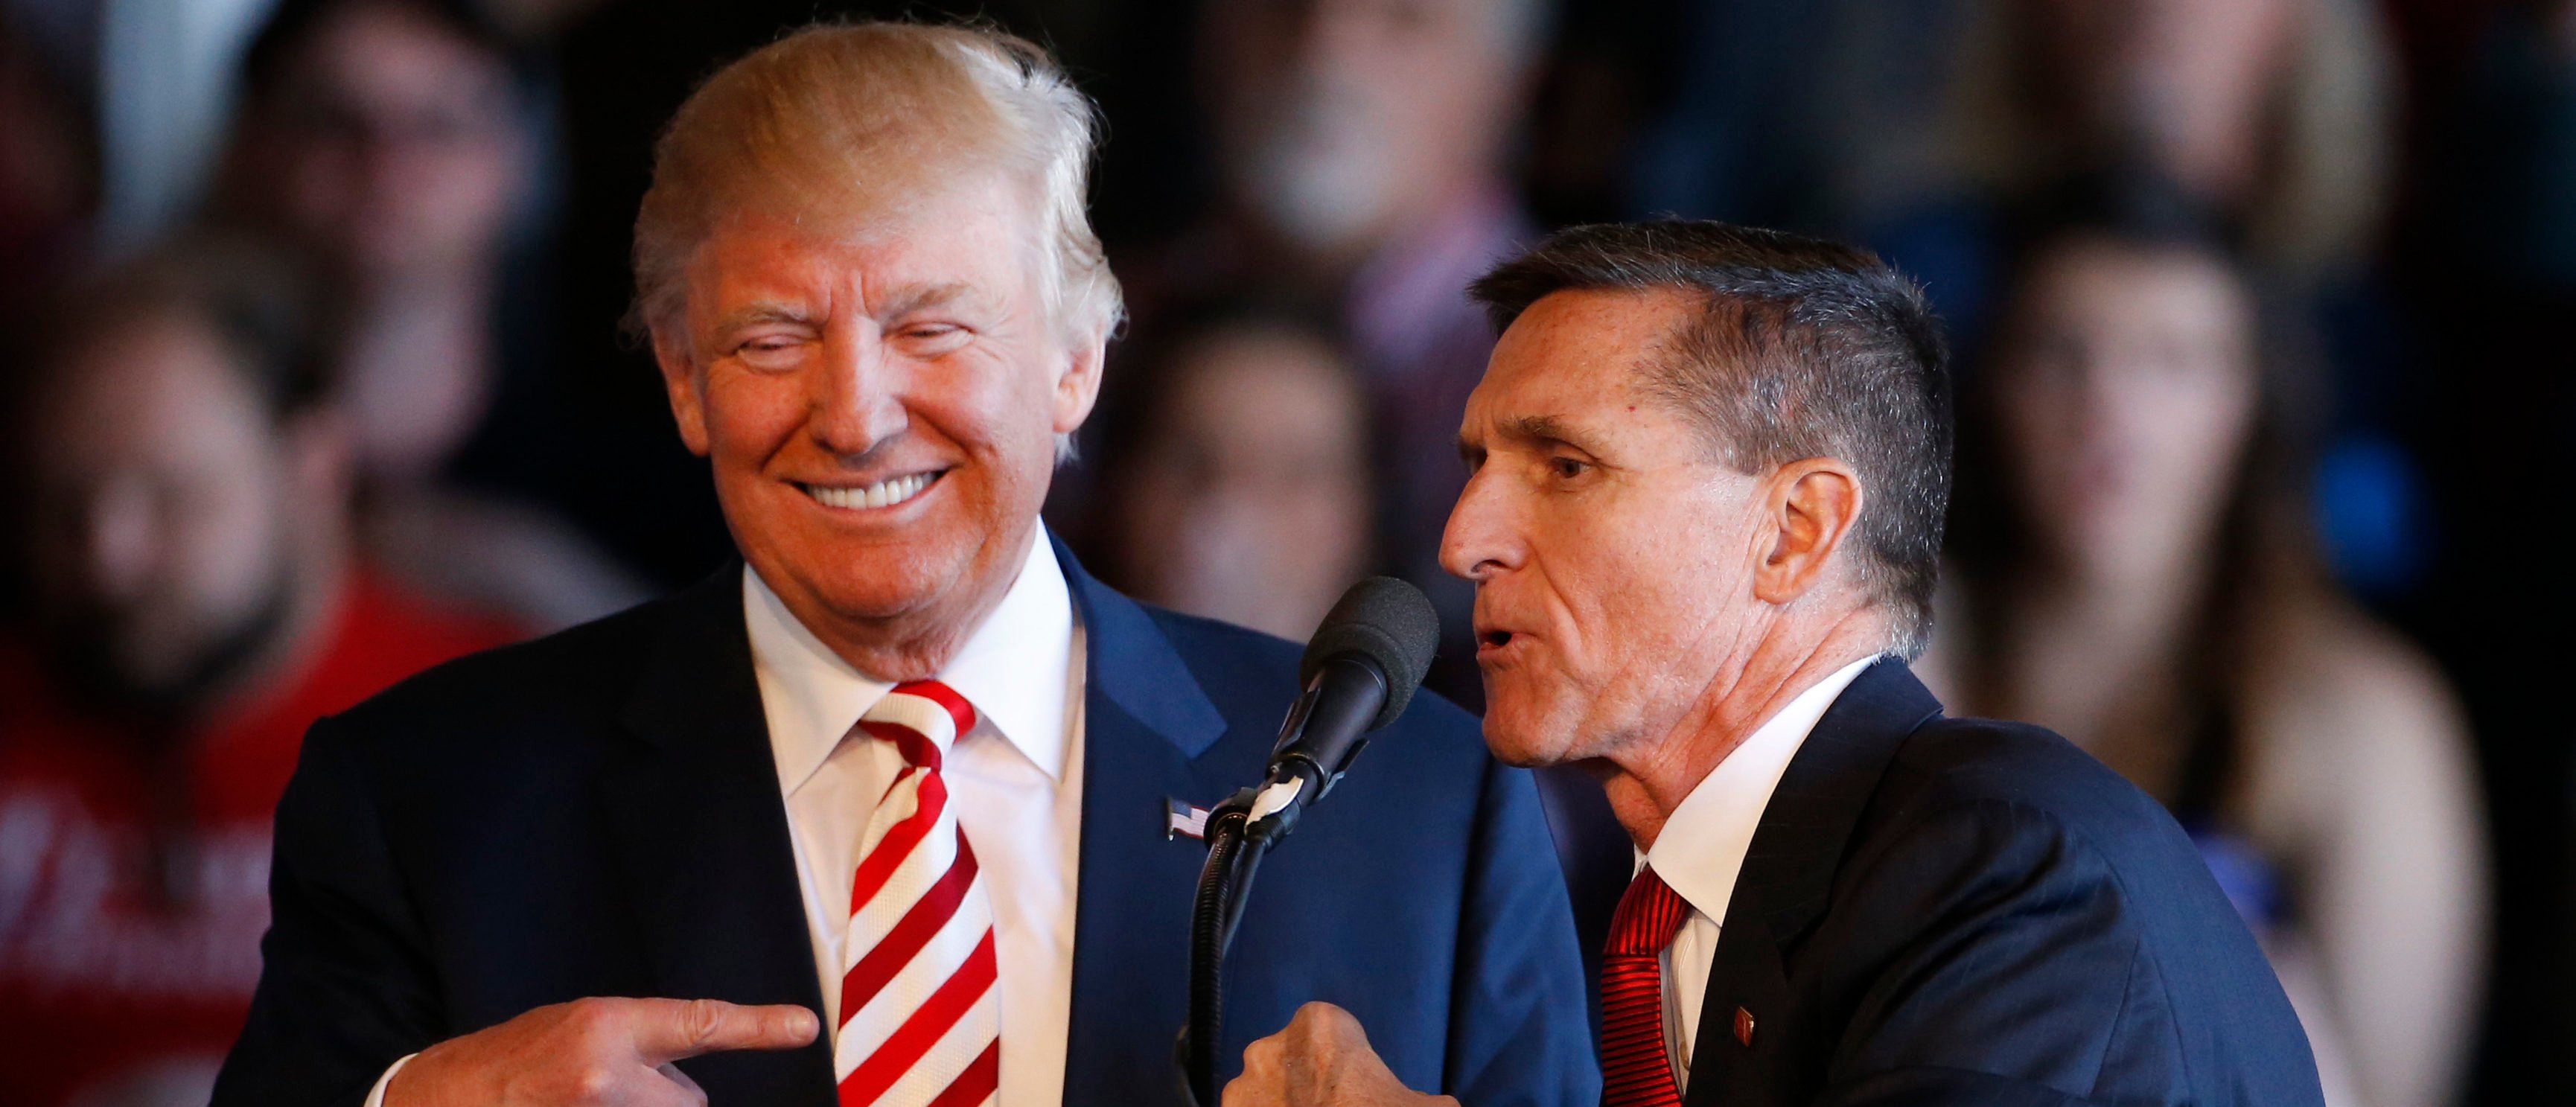 GRAND JUNCTION, CO - OCTOBER 18: Republican presidential candidate Donald Trump (L) jokes with retired Gen. Michael Flynn as they speak at a rally at Grand Junction Regional Airport on October 18, 2016 in Grand Junction Colorado. Trump is on his way to Las Vegas for the third and final presidential debate against Democratic rival Hillary Clinton. (Photo by George Frey/Getty Images)